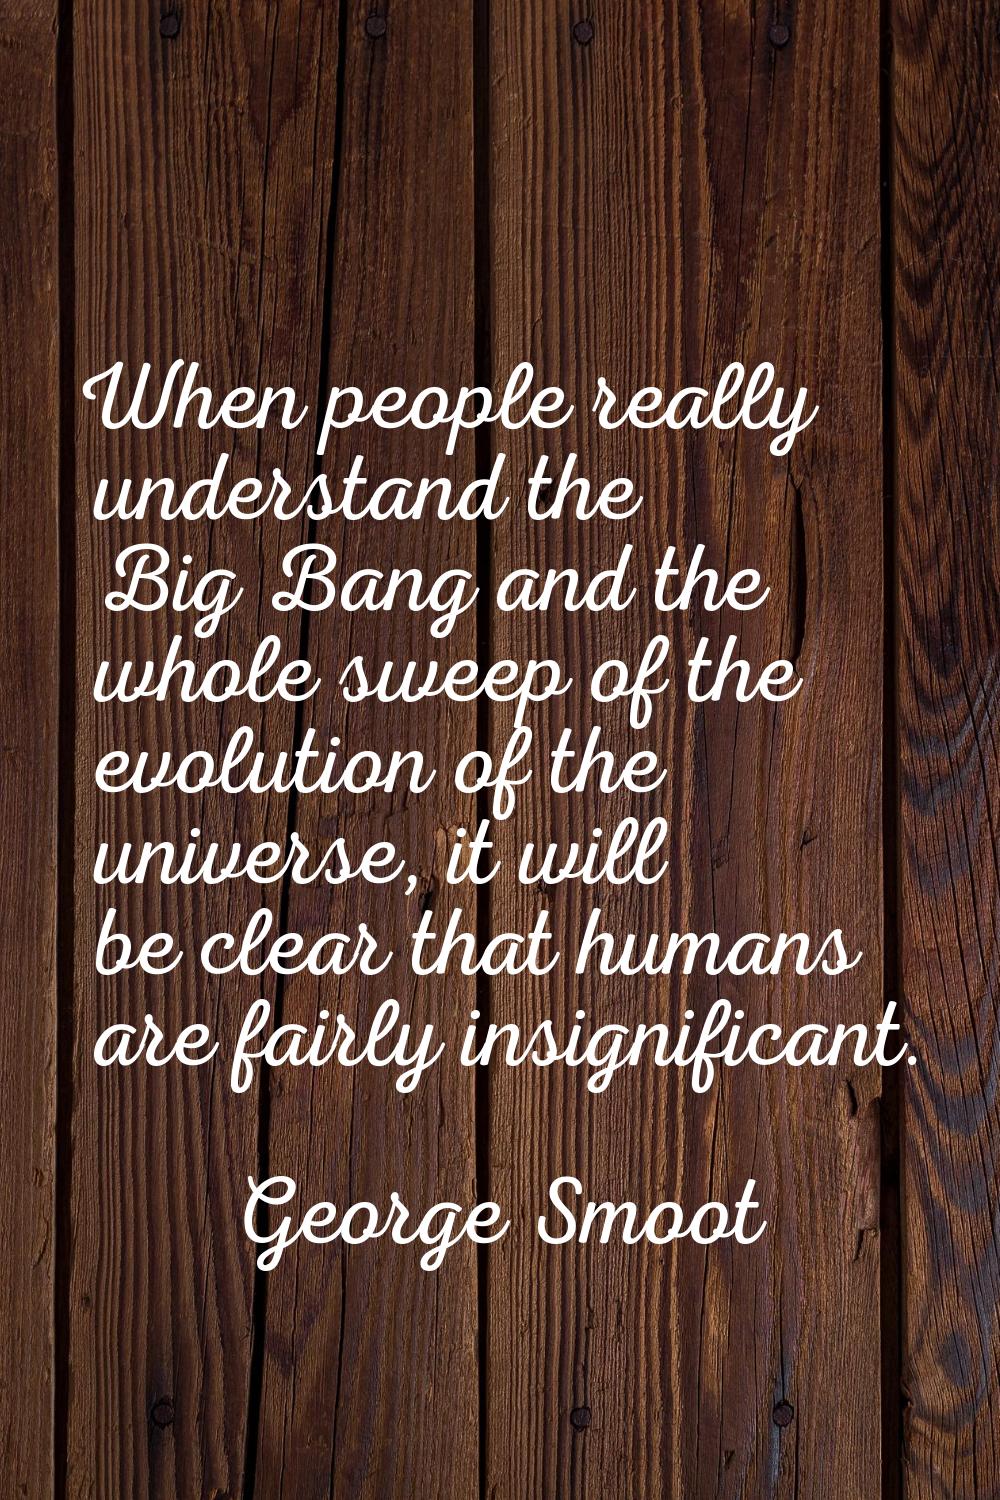 When people really understand the Big Bang and the whole sweep of the evolution of the universe, it